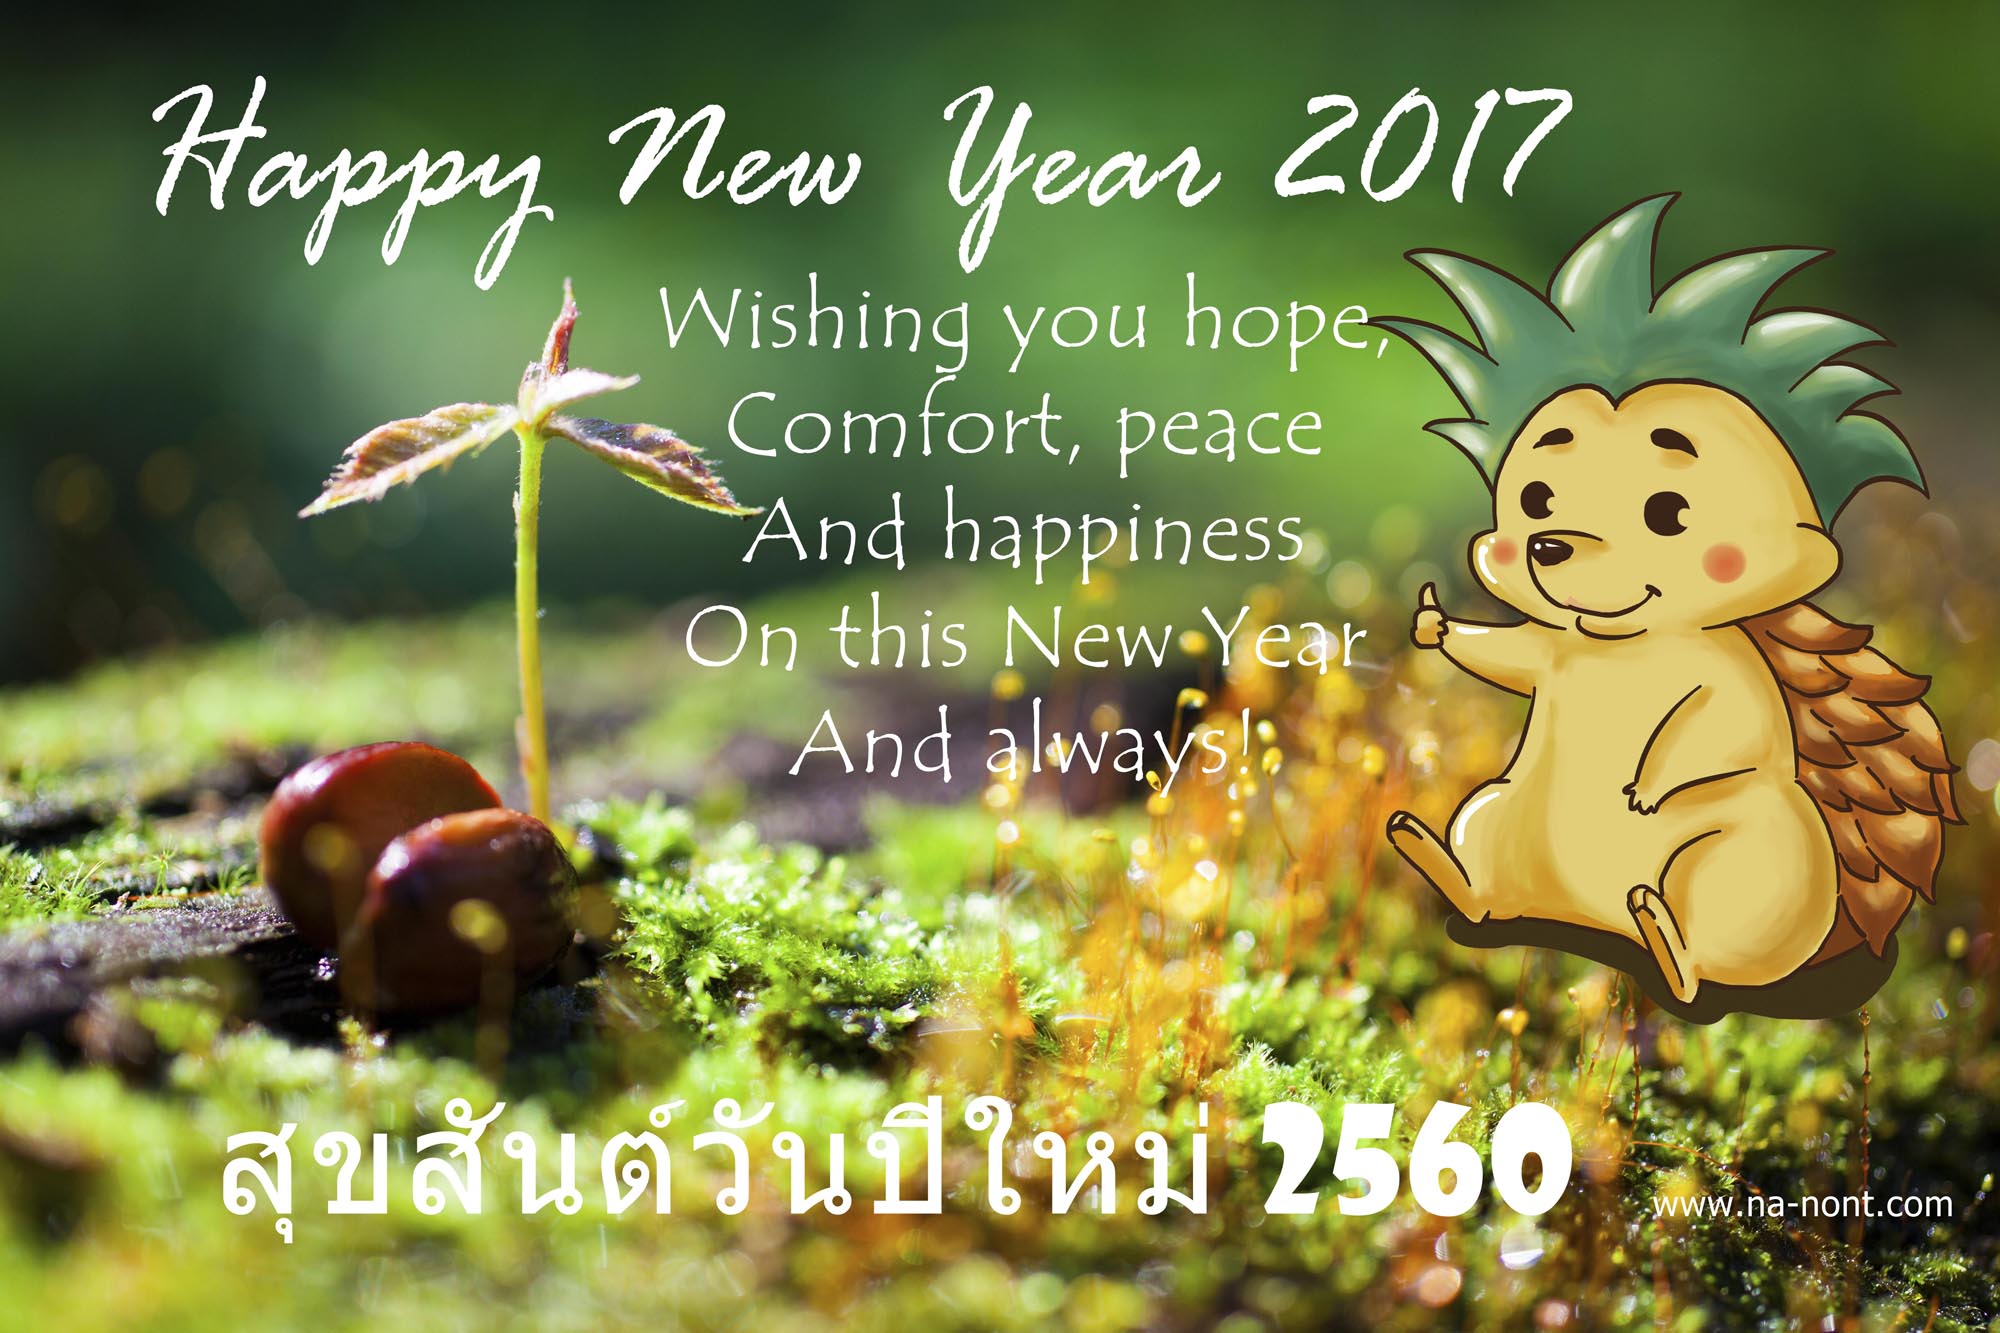 Images/Blog/7180251-HAPPY NEW YEAR 2017_NA_NONT.jpg